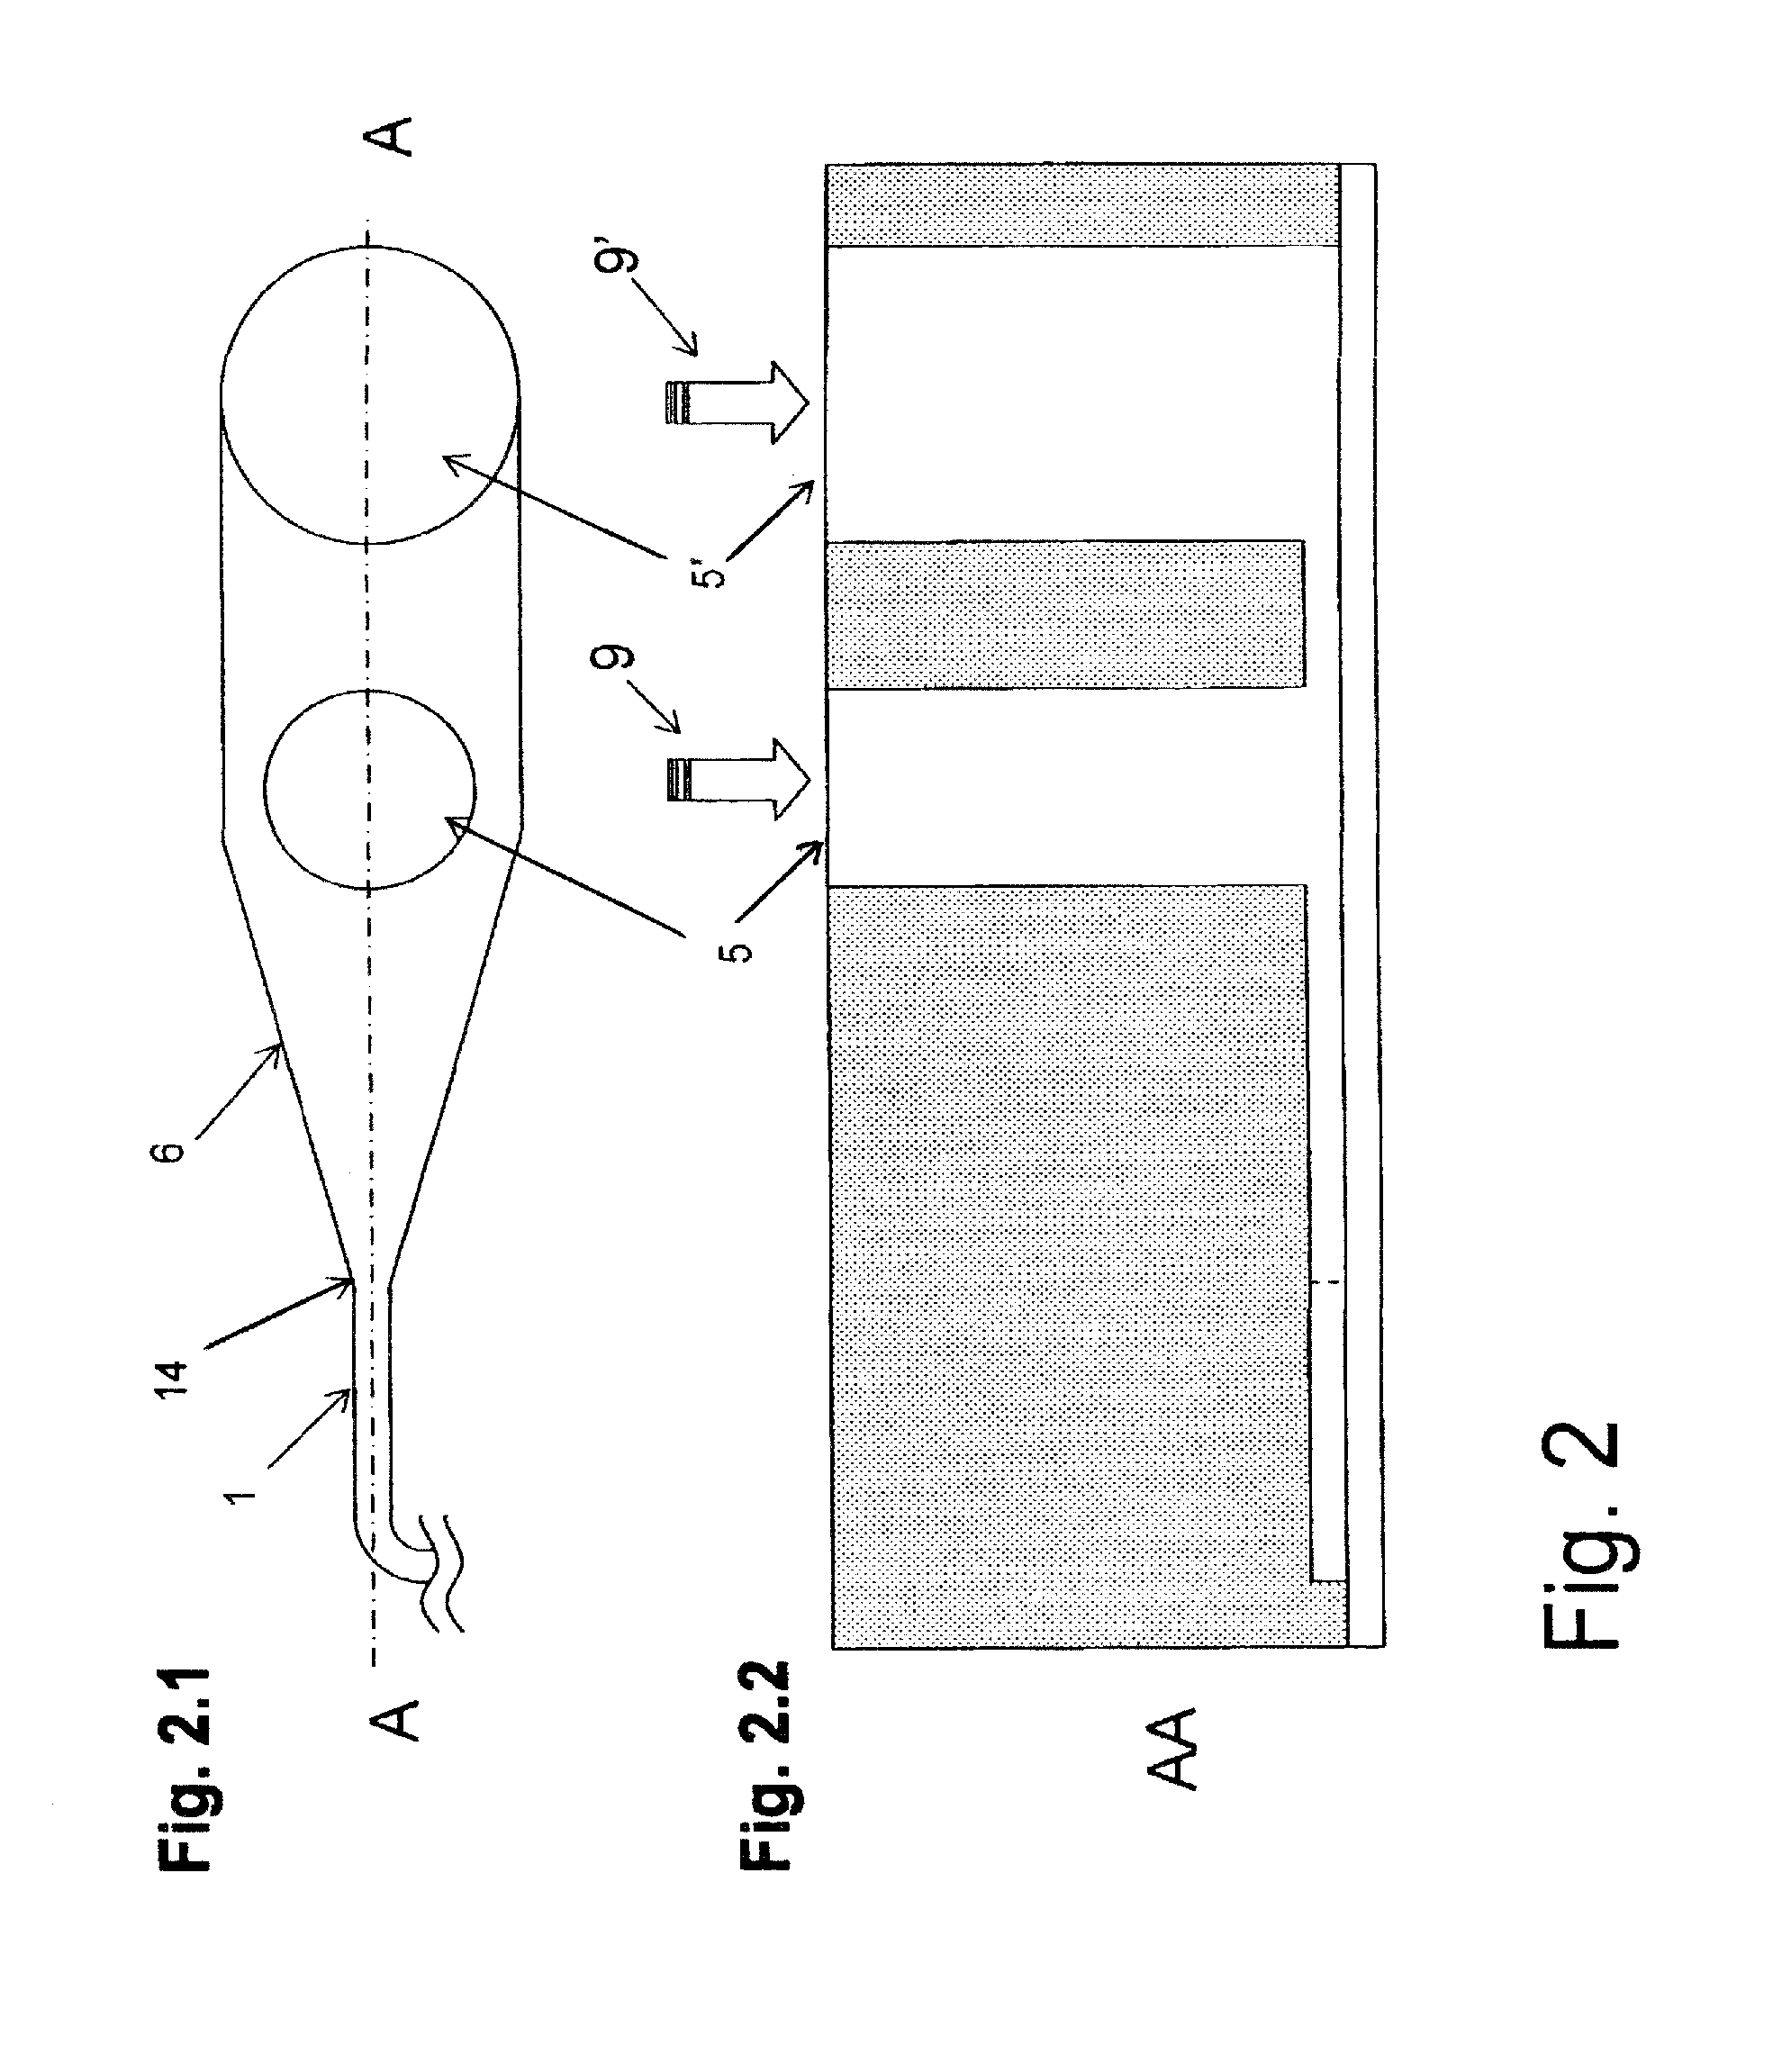 Assay device and method for performing biological assays